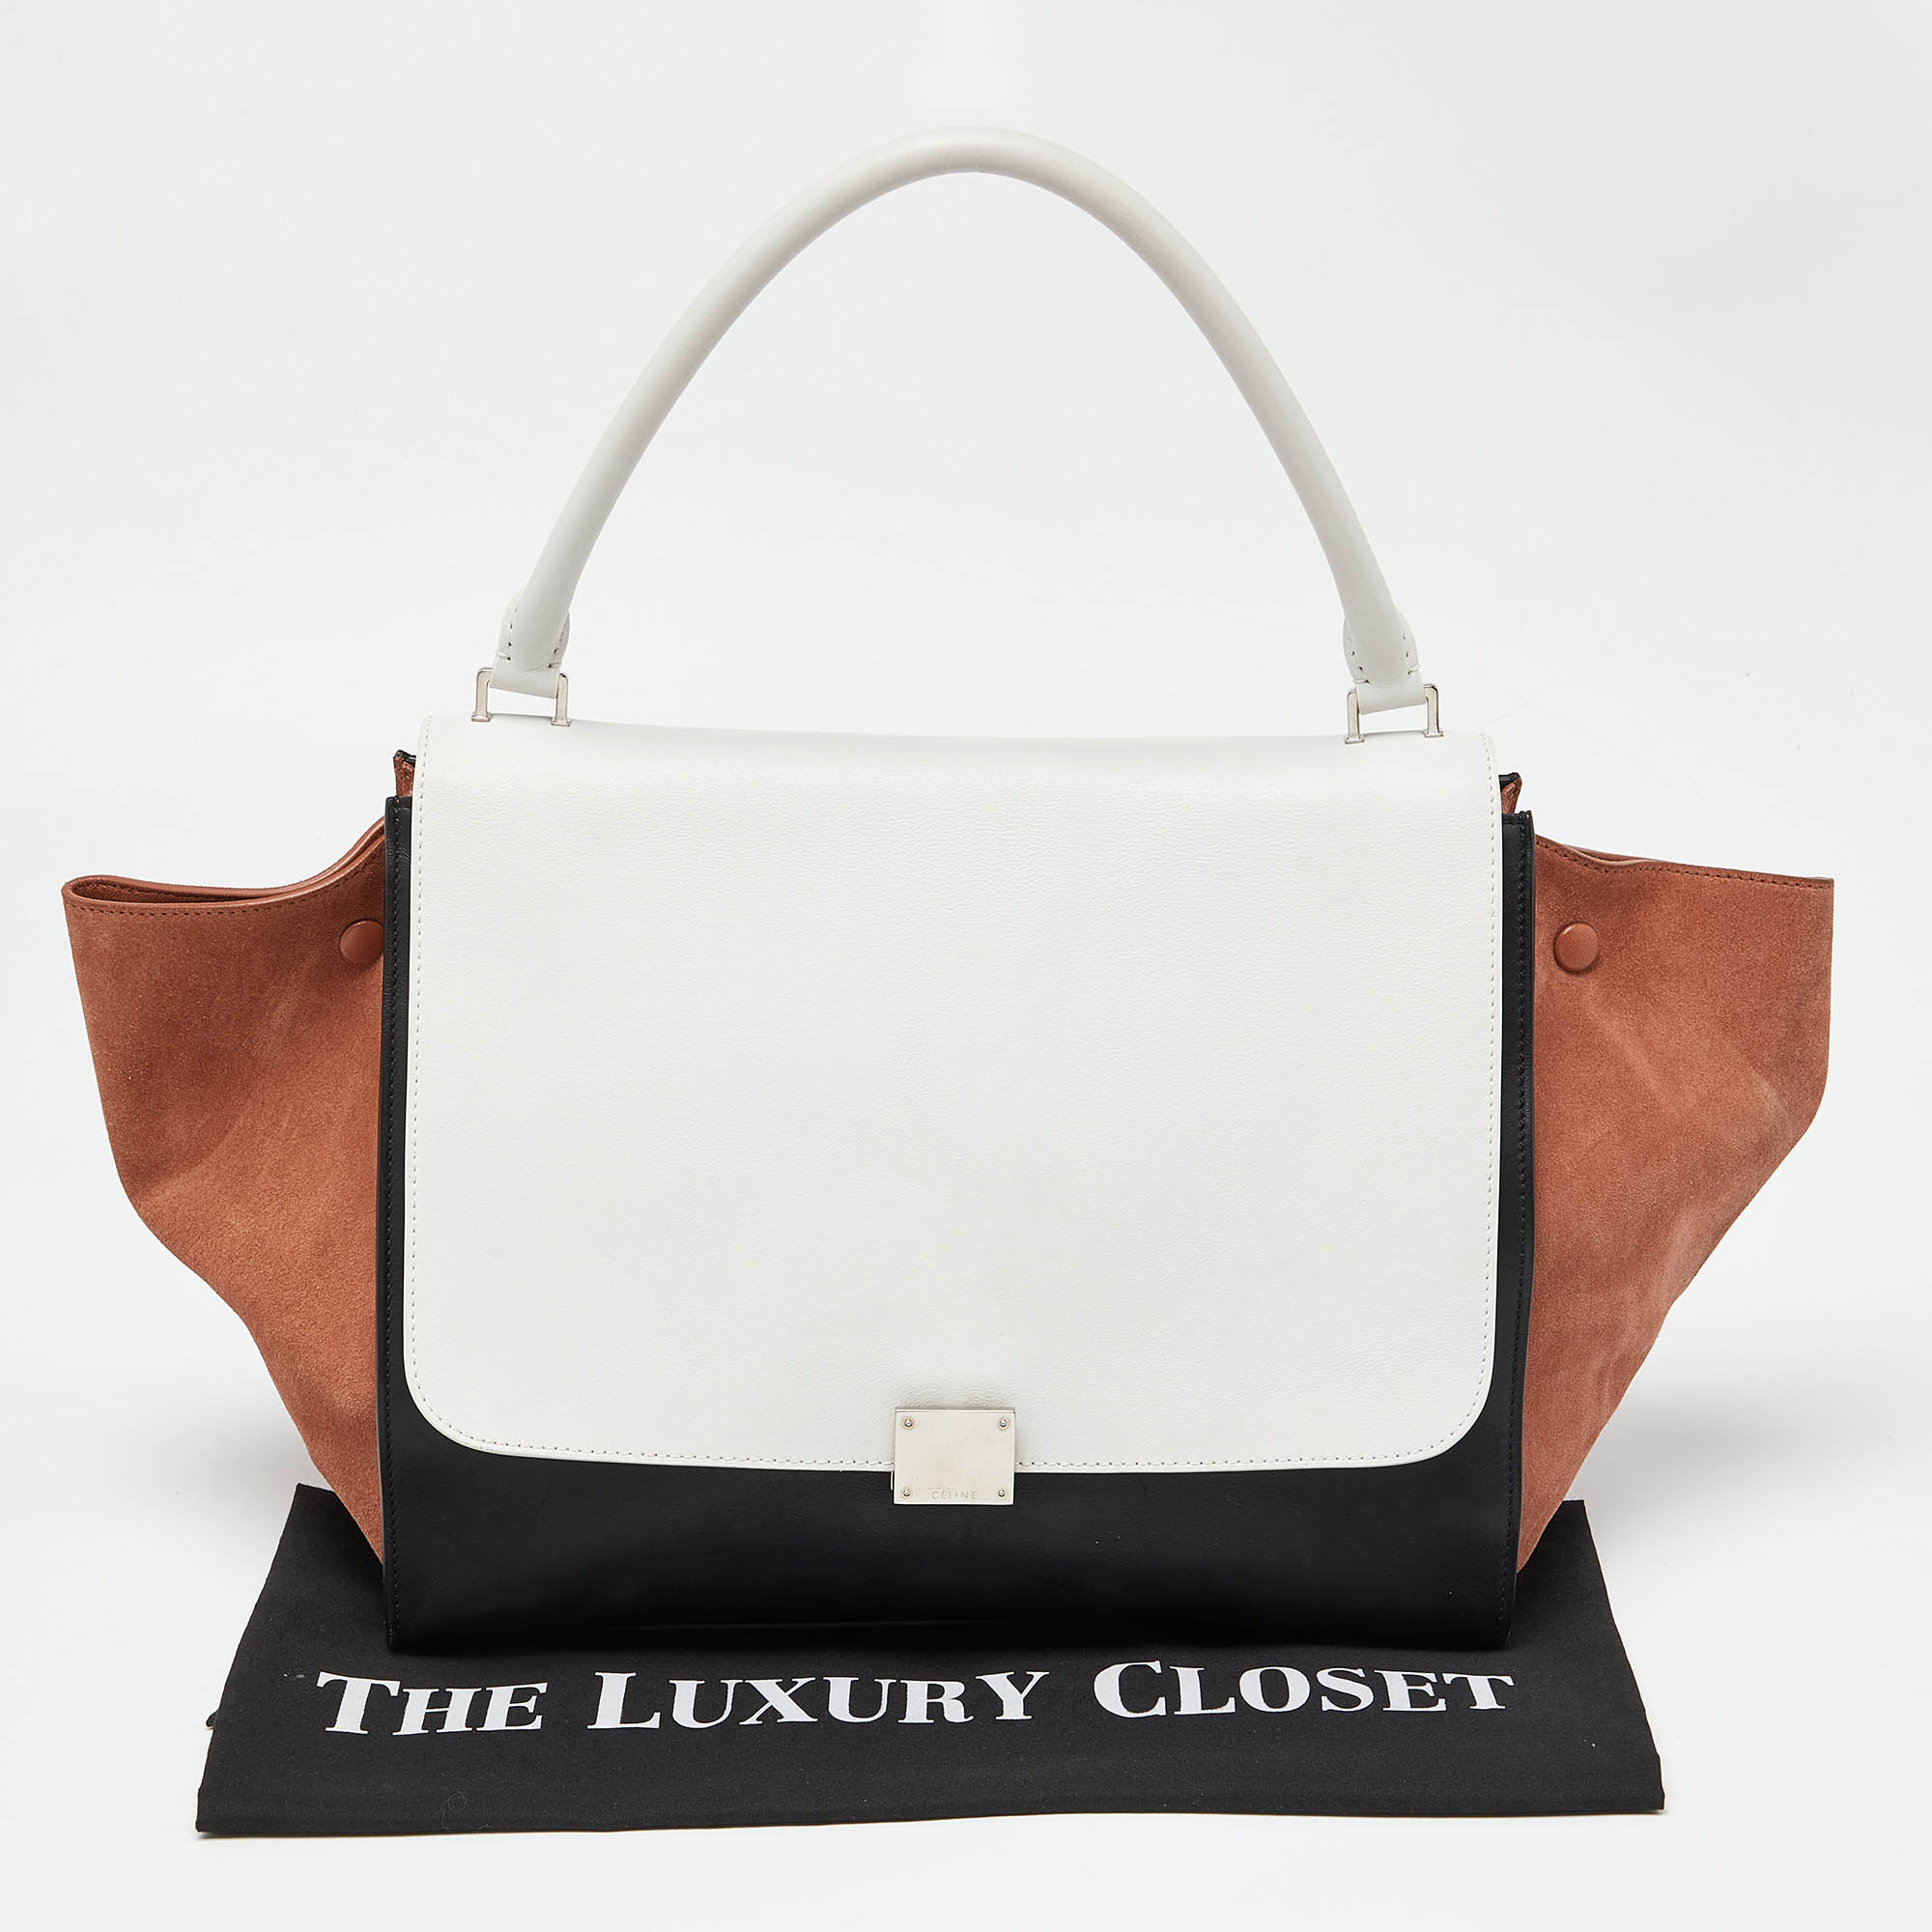 Celine Tricolor Leather And Suede Large Trapeze Top Handle Bag